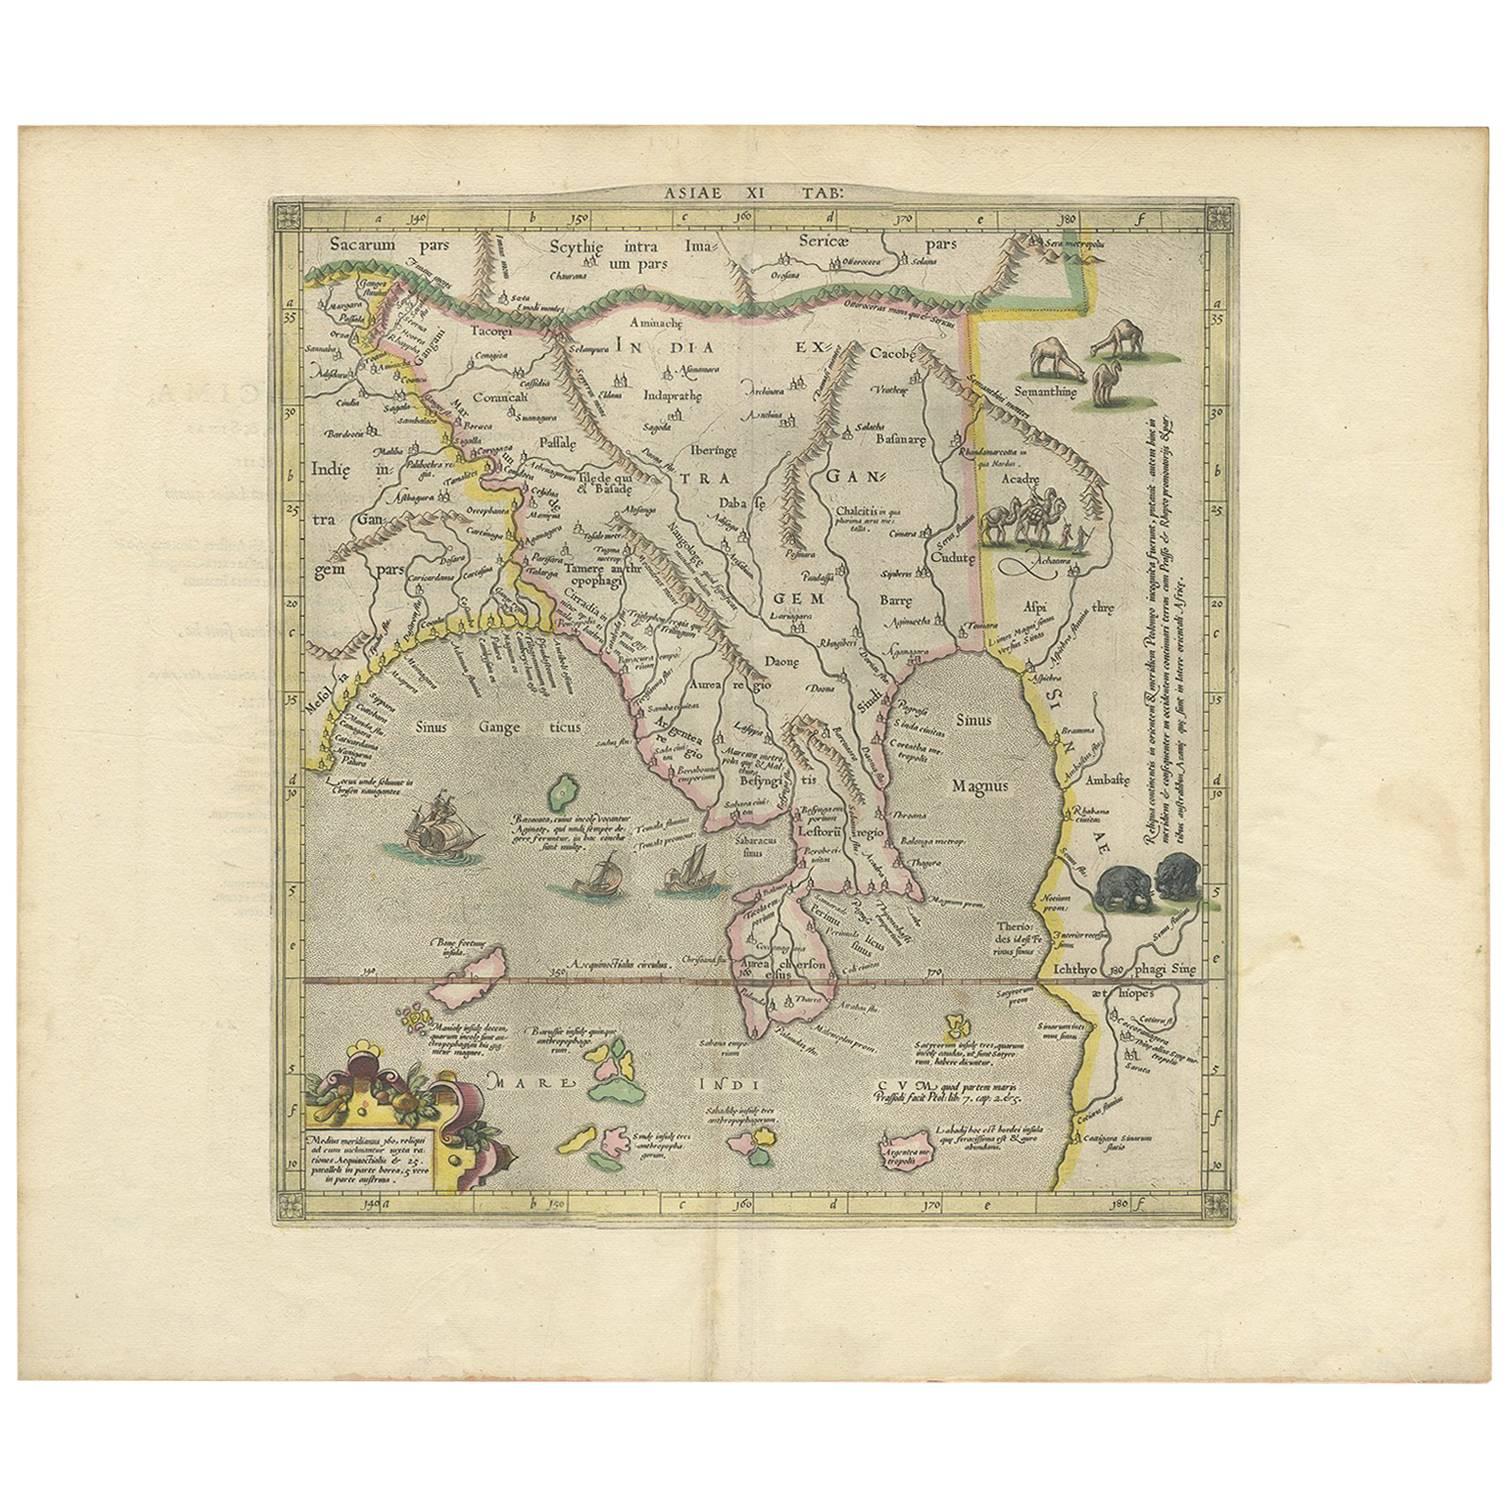 Antique Map of Southeast Asia by P. Bertius, 1618